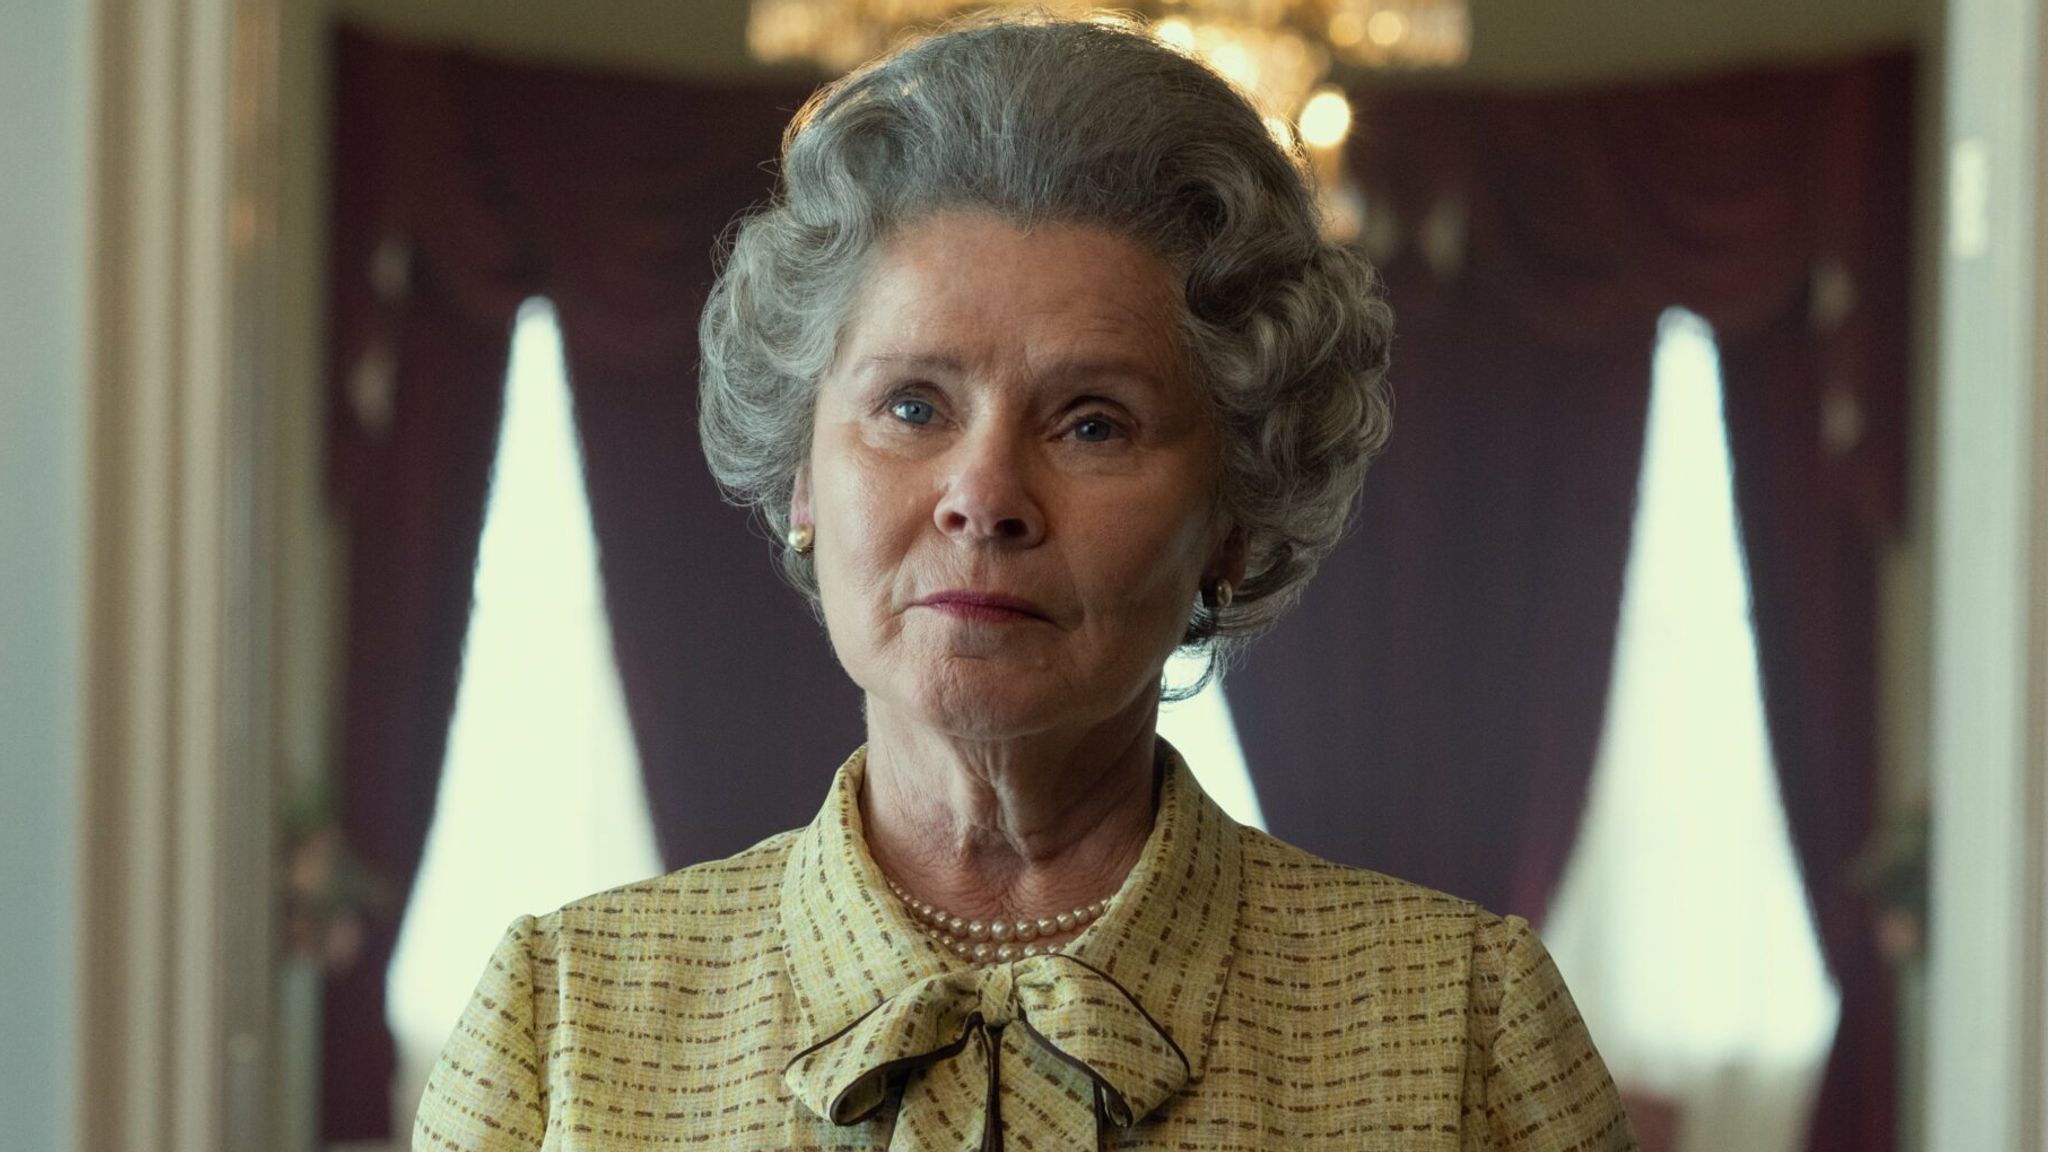 The Crown: First image released of Imelda Staunton as the Queen in